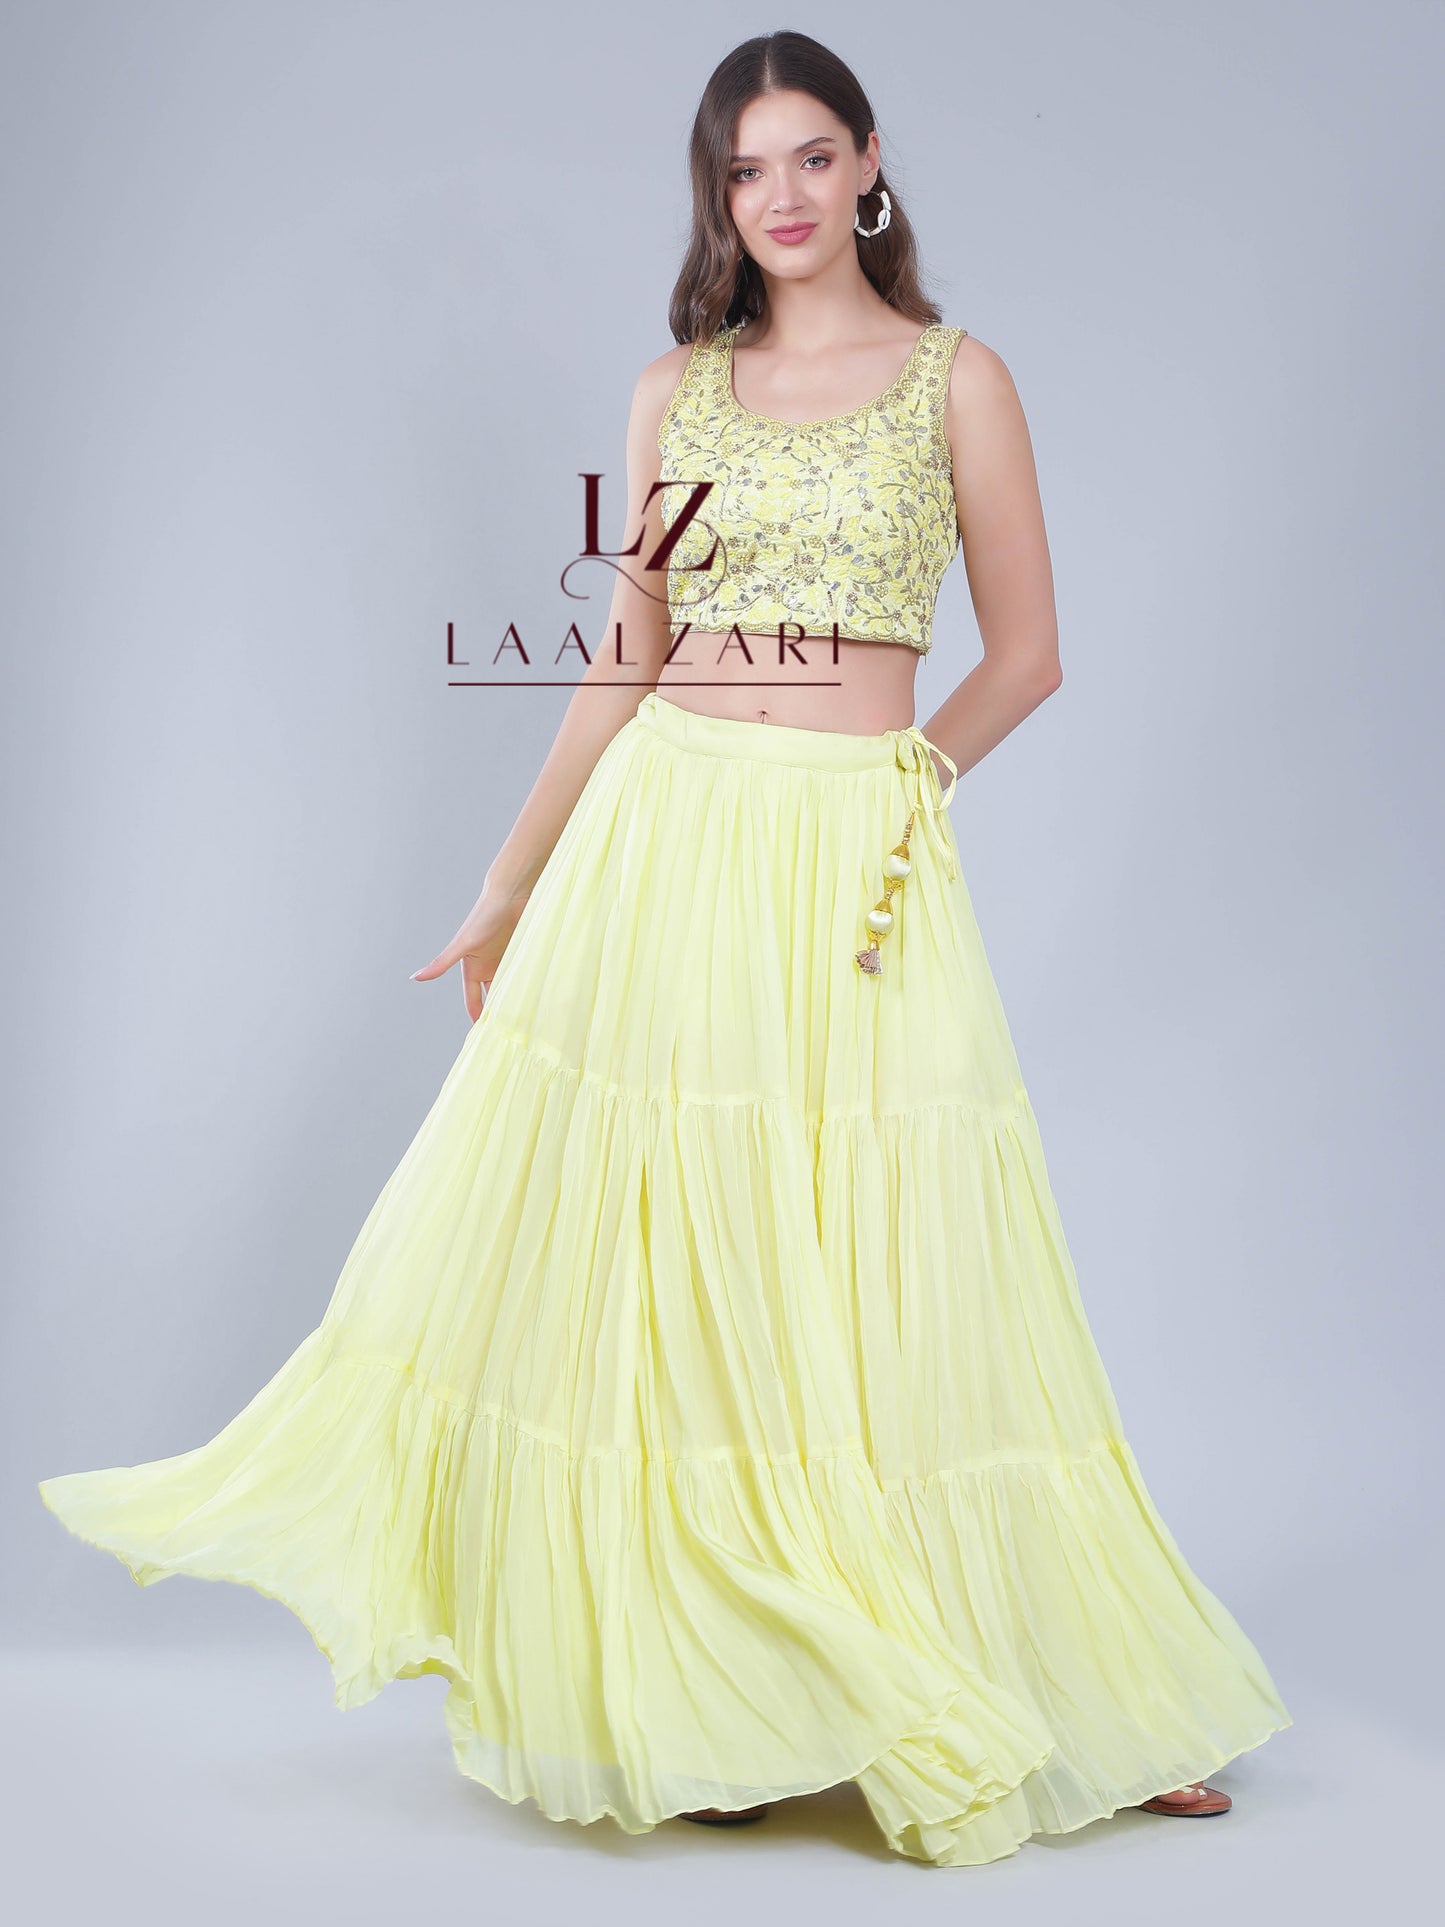 Citric fun Crop top and skirt